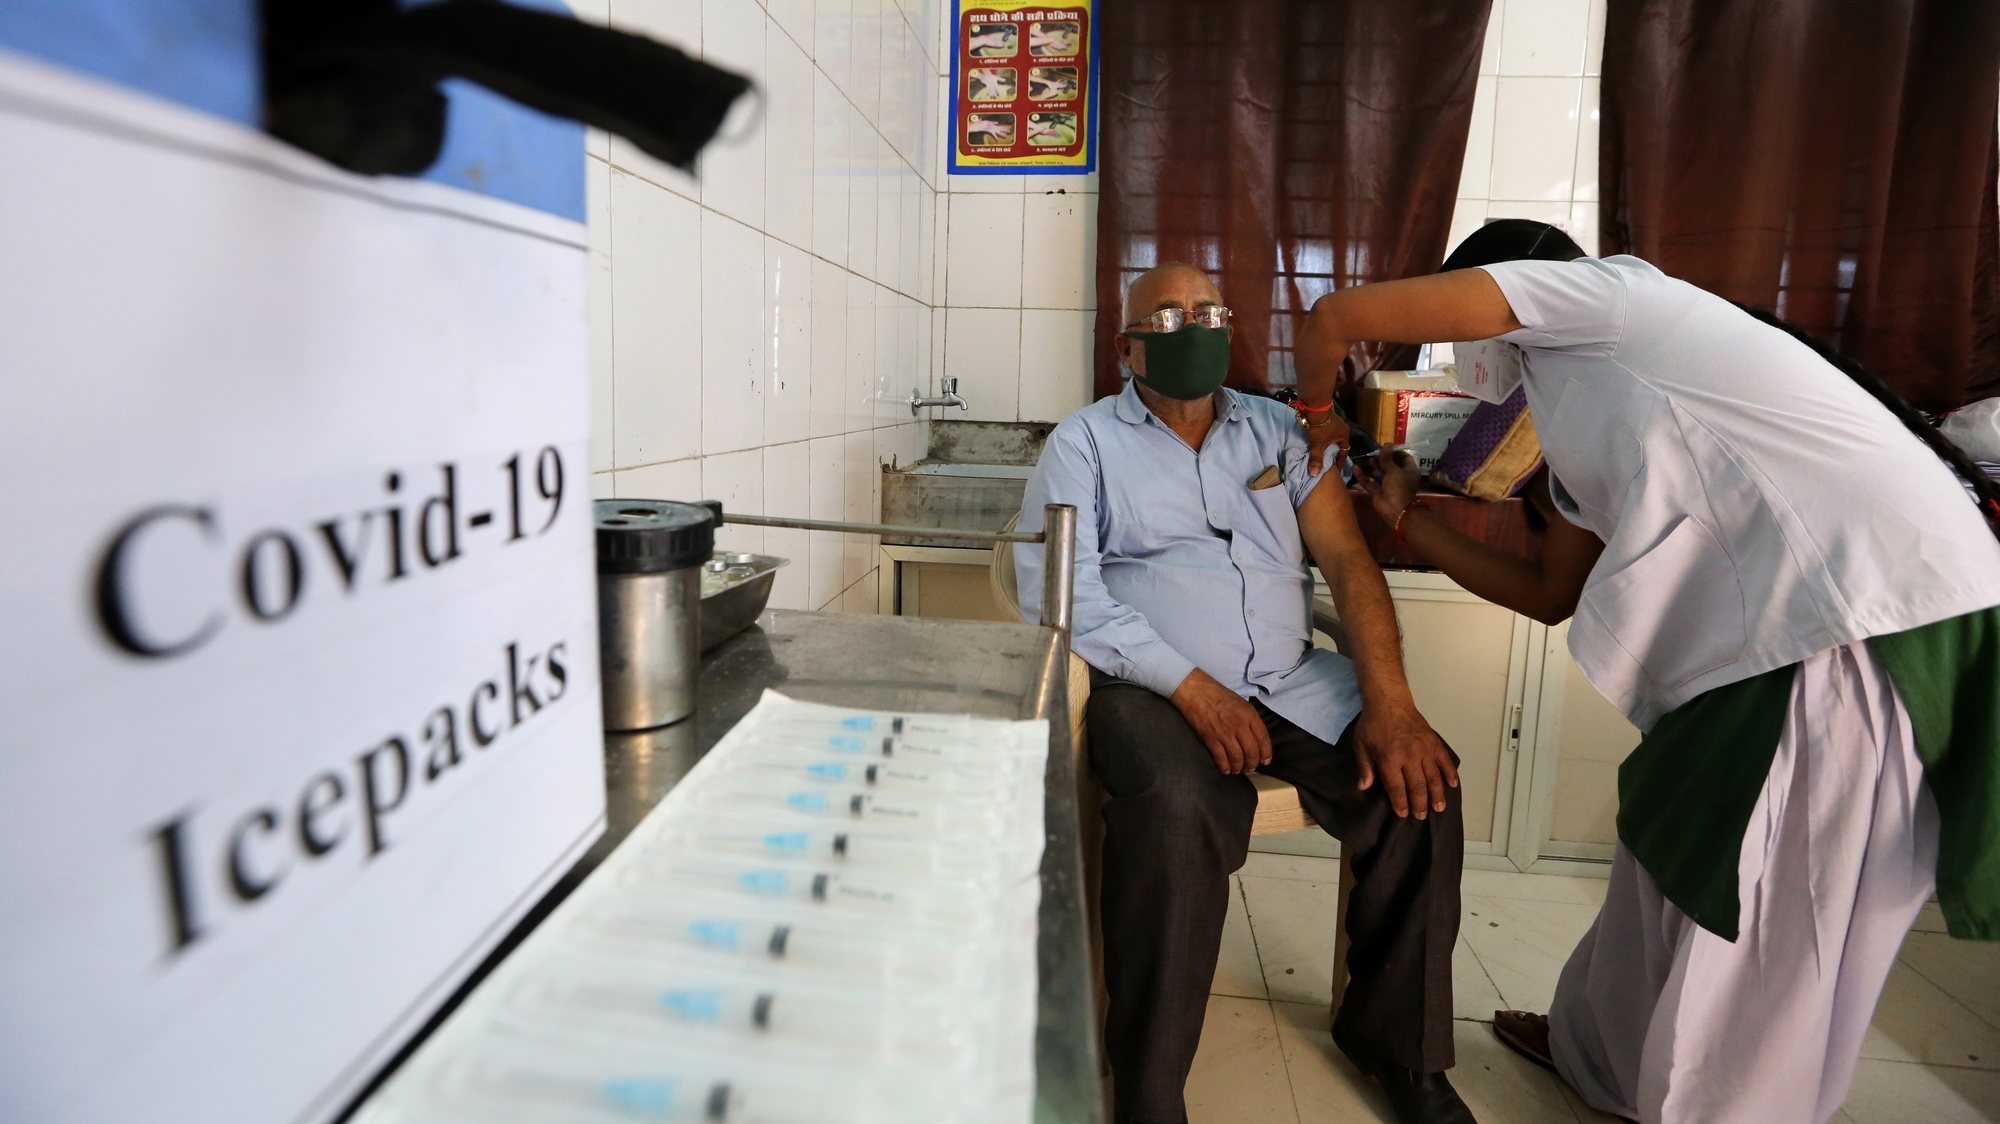 epa09075621 A man receives a shot of COVID-19 vaccine during the vaccination drive at a clinic in Misrod village, Bhopal, India, 15 March 2021. Phase two of the COVID-19 vaccination started in India on 01 March for people aged 60 and above.  EPA/SANJEEV GUPTA